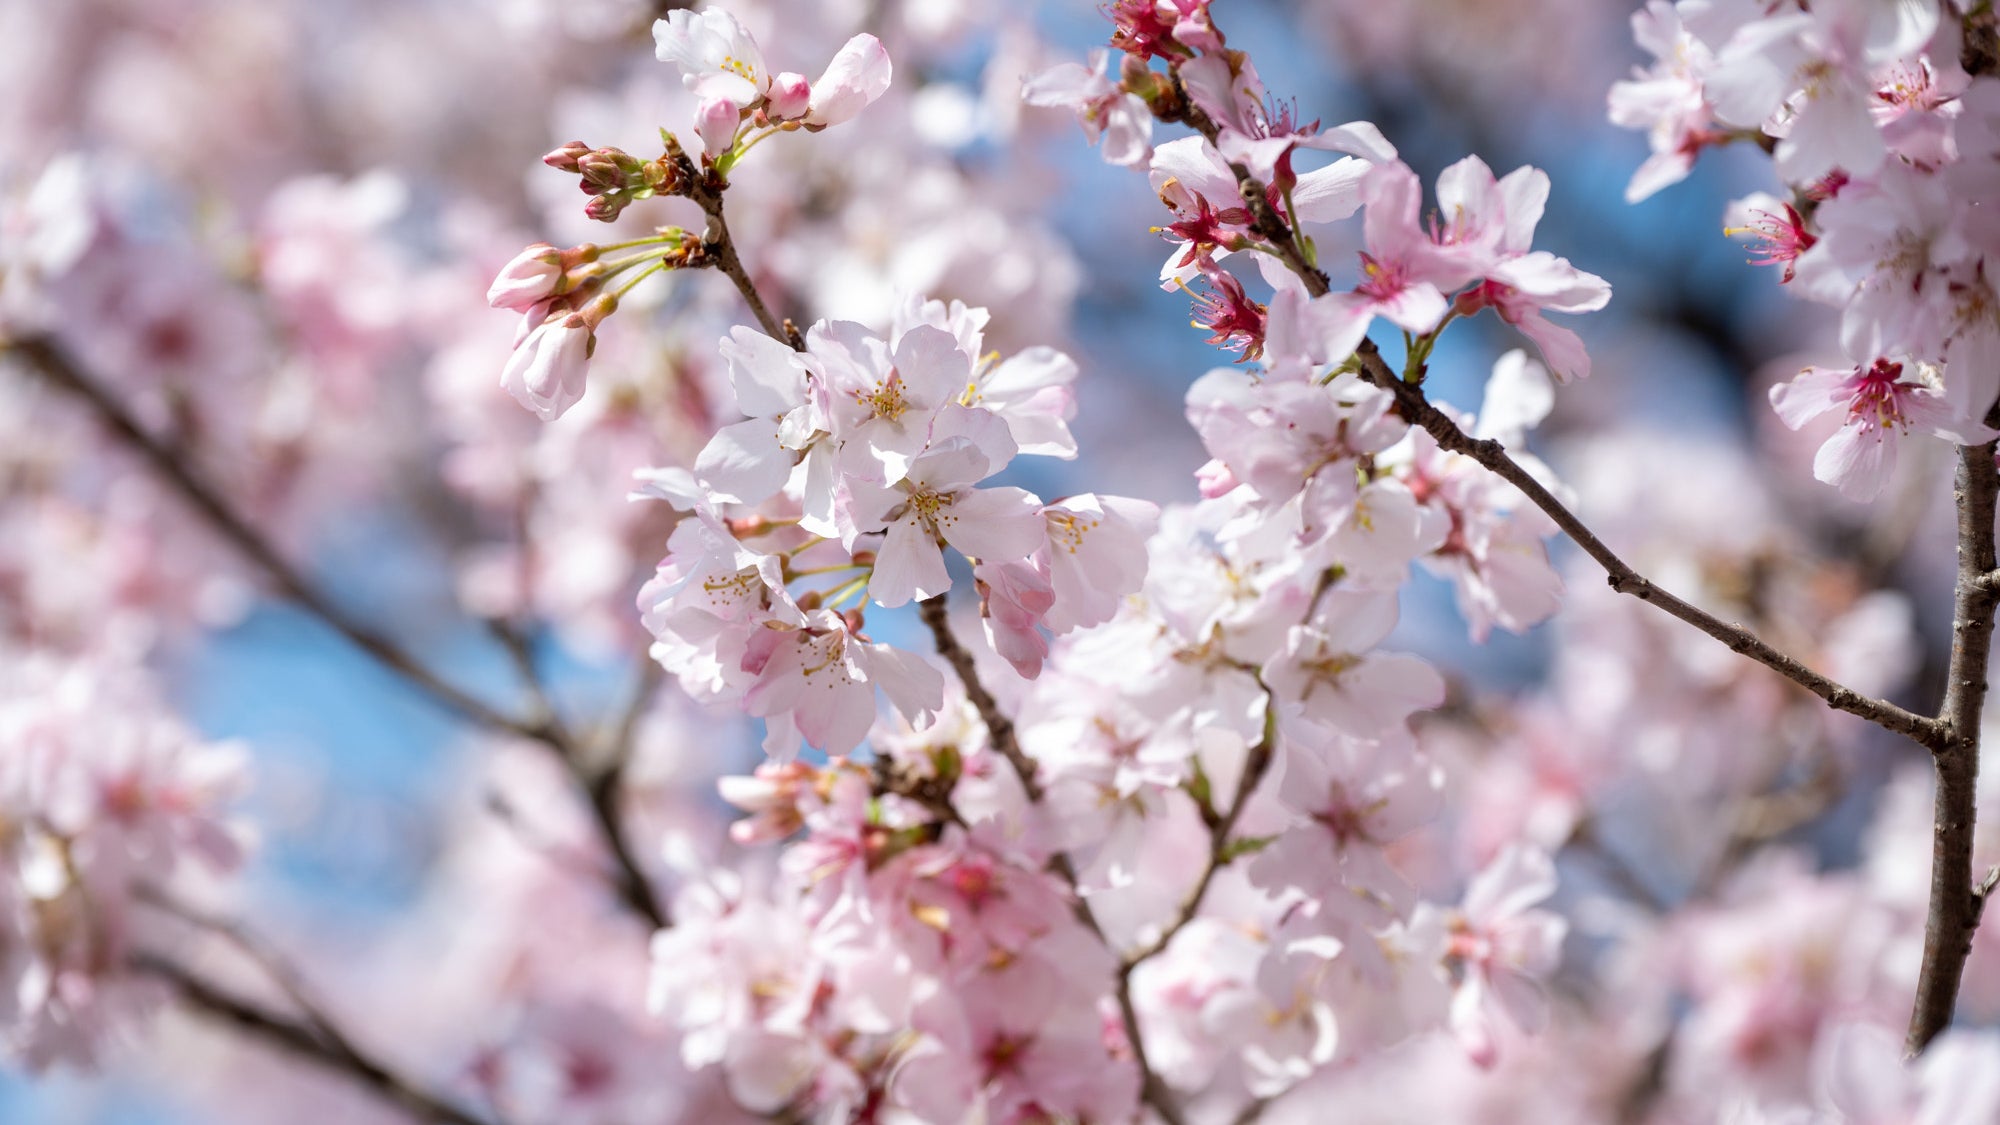 10 Cherry-picked Facts to Wow Your Hanami Buddies 